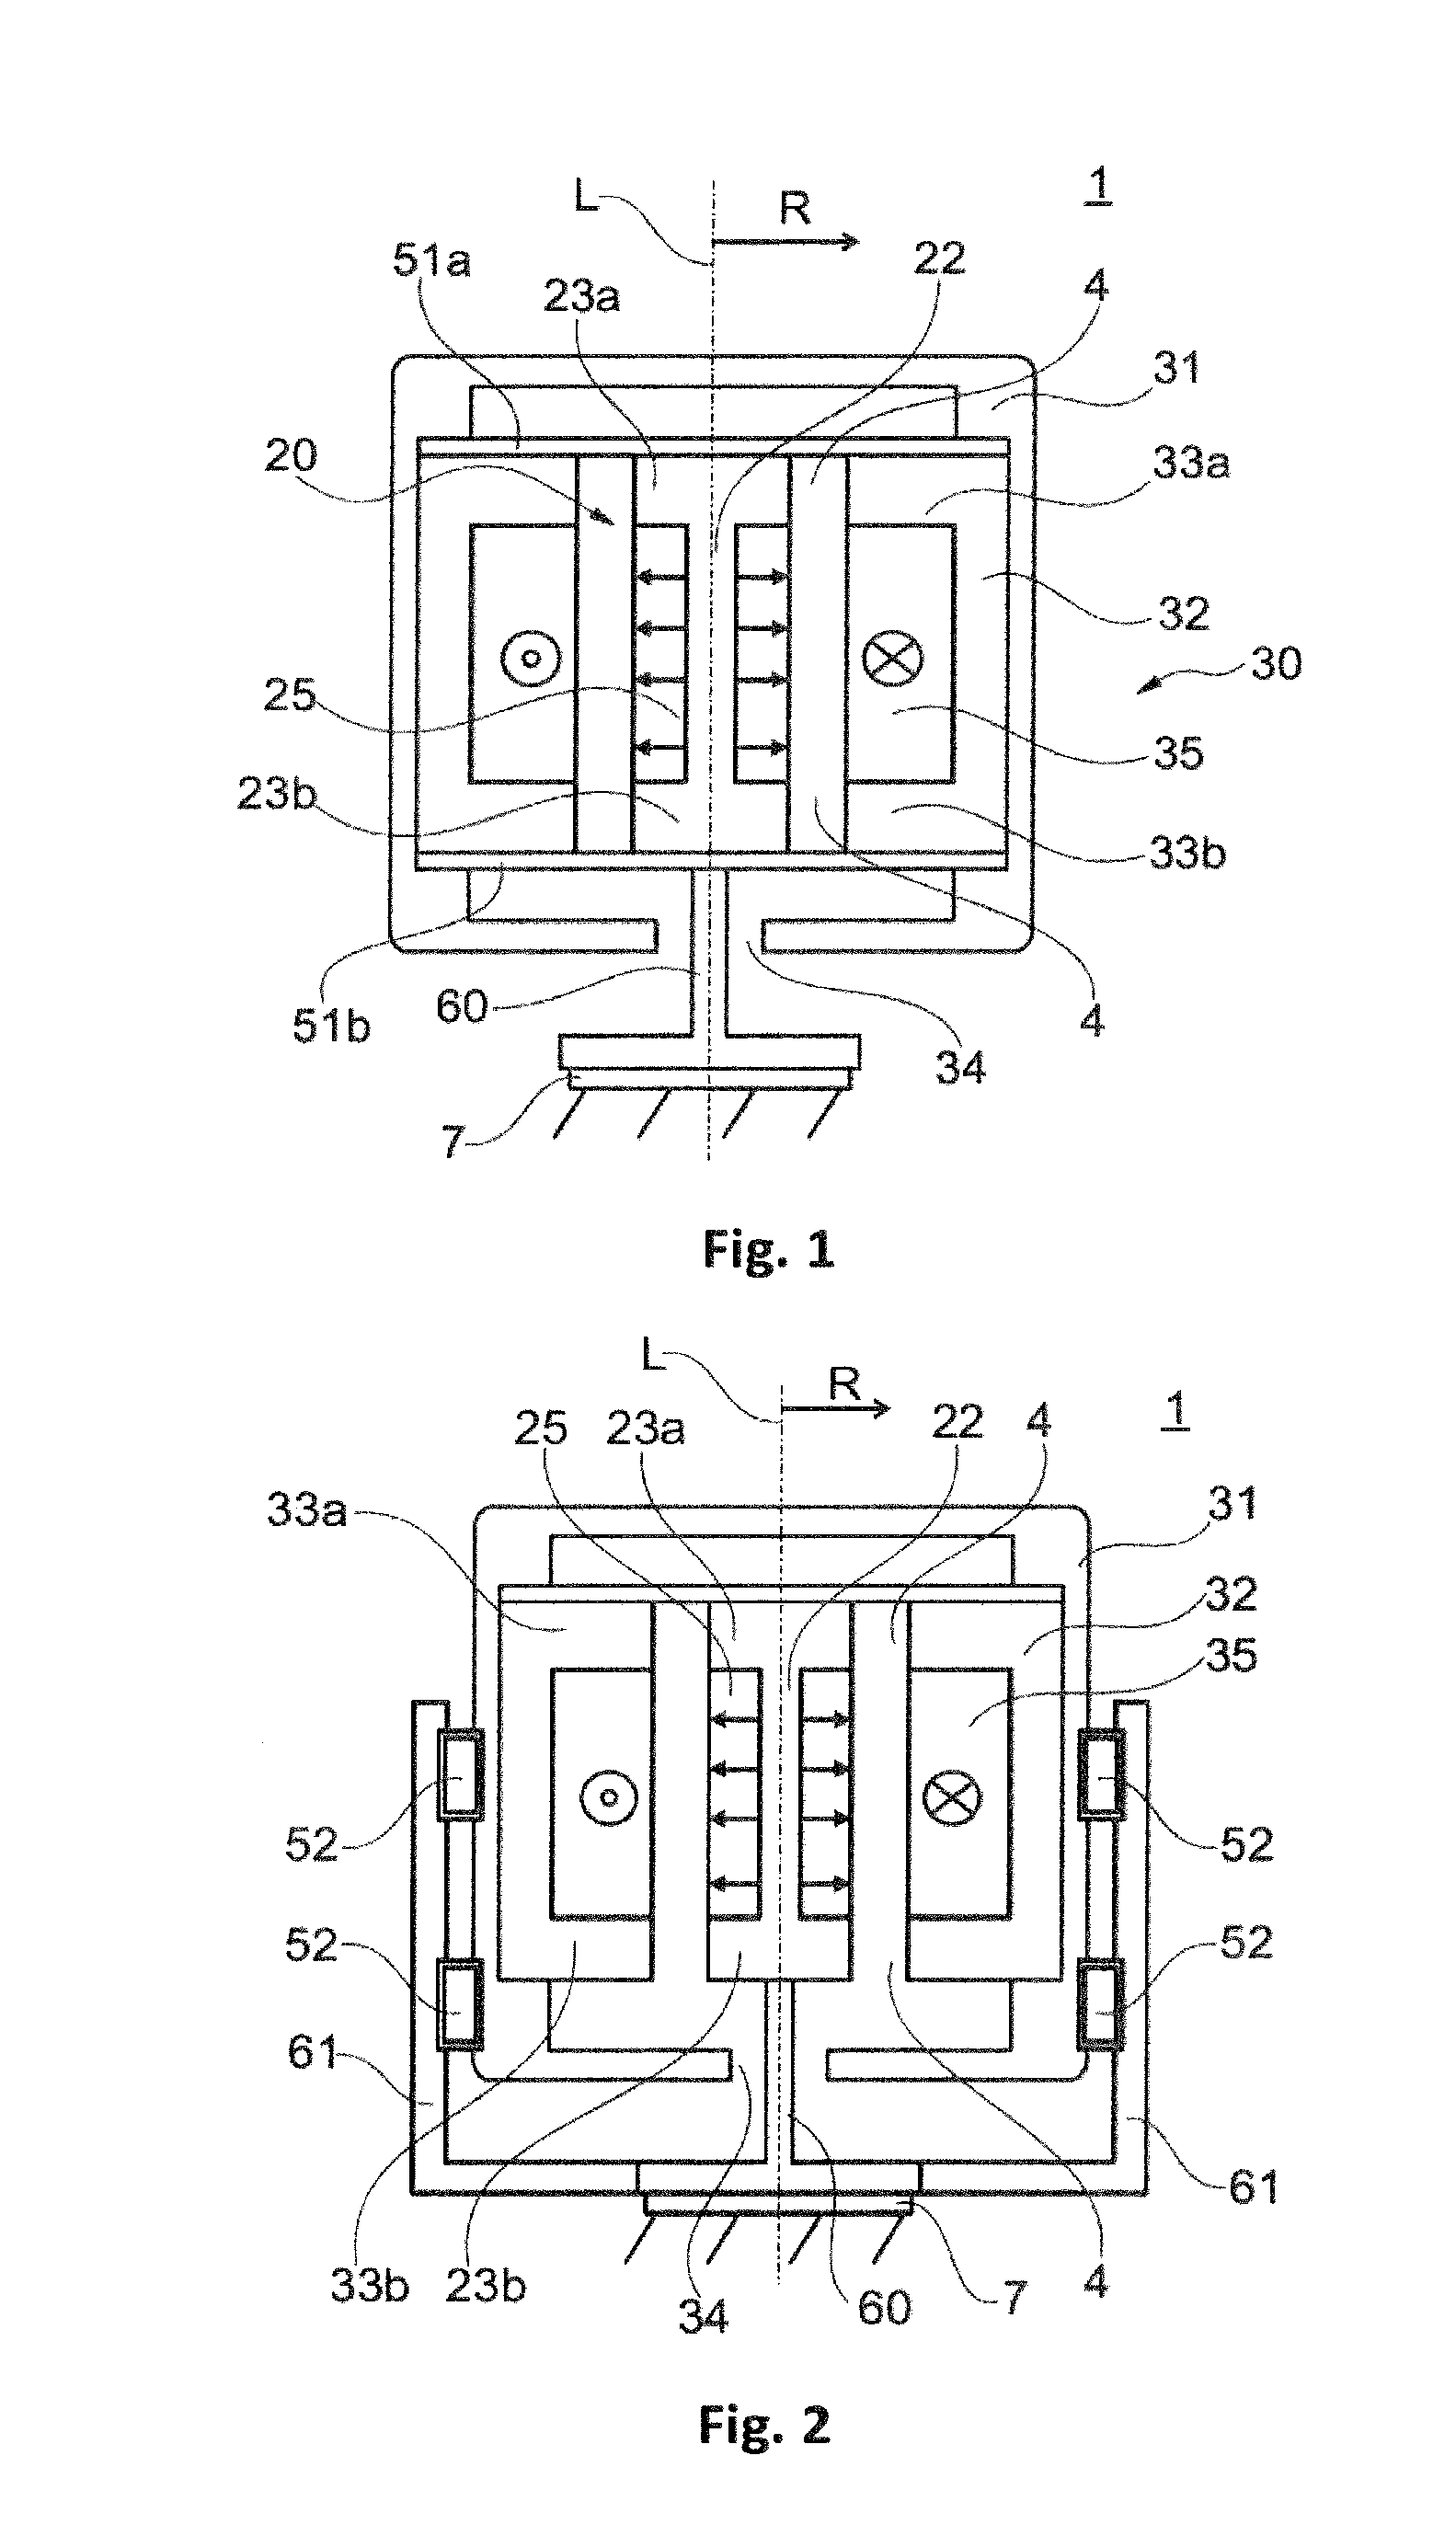 Actuator for damping low-frequency oscillations